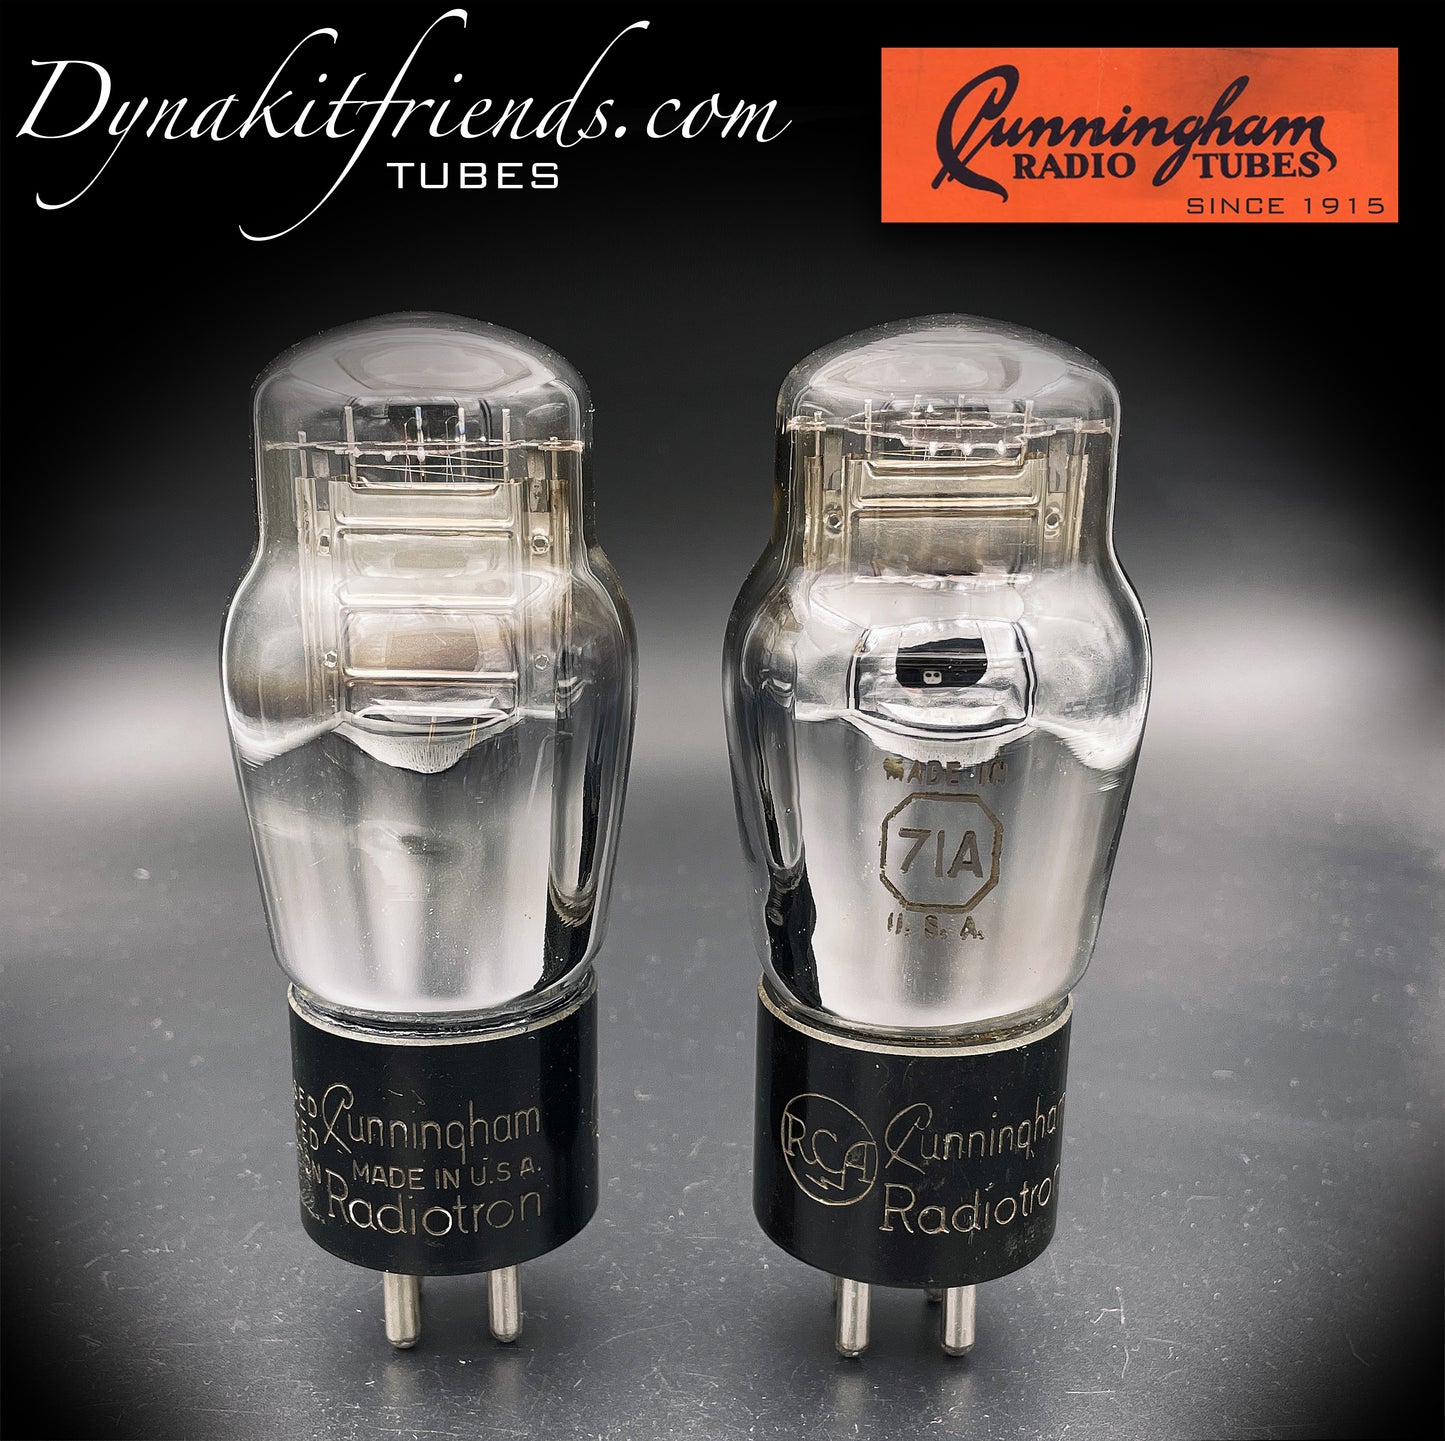 71A ST CUNNINGHAM by RCA Power Triode Matched Pair Tubes Made In USA Test NOS